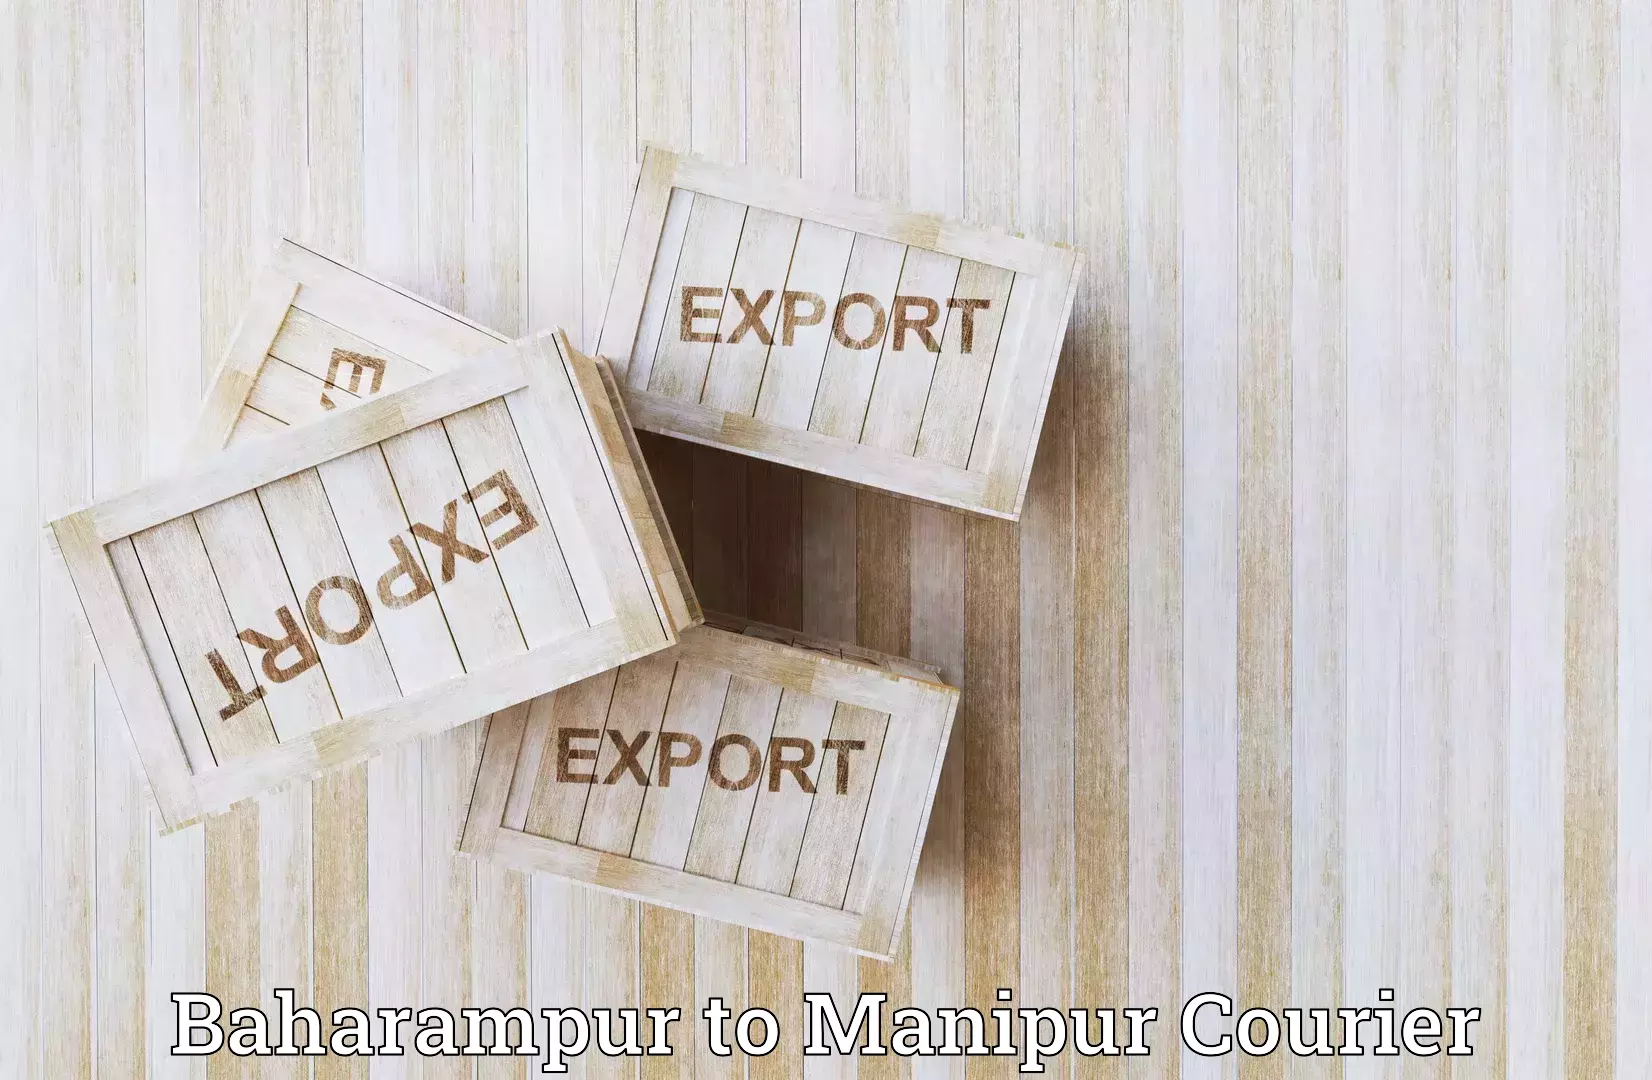 Efficient shipping operations Baharampur to Chandel